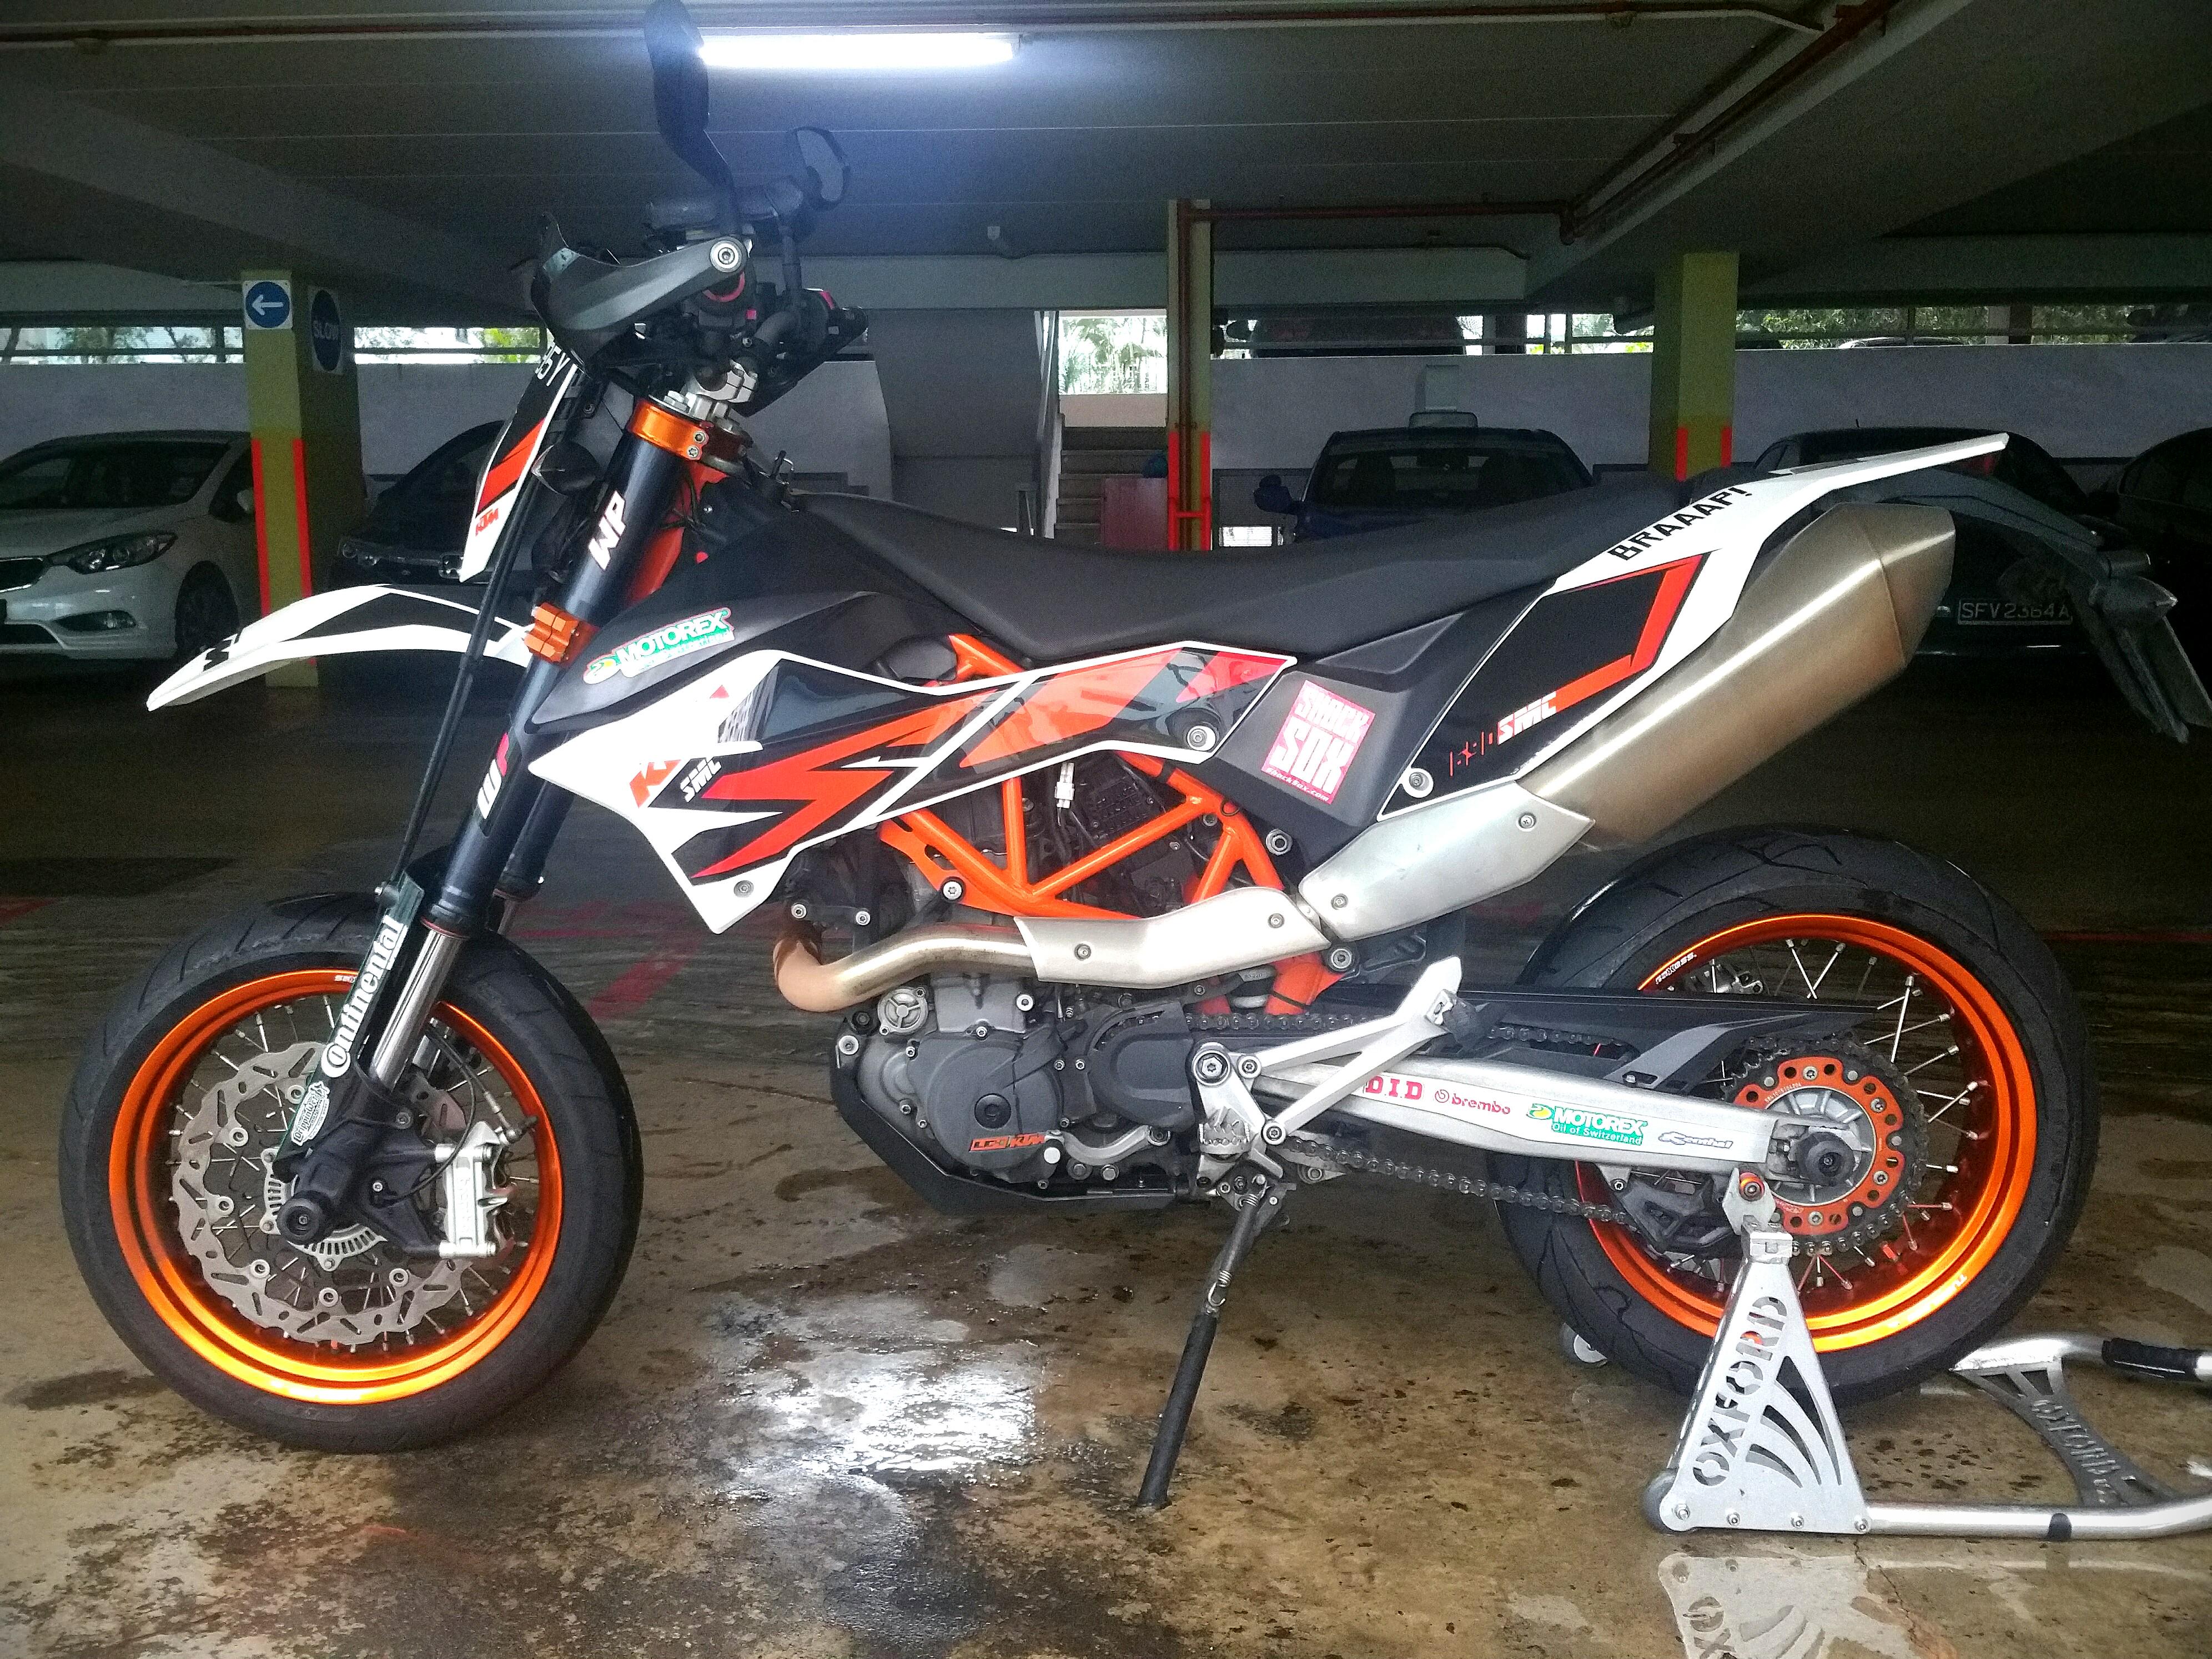 Ktm 690 Smc R Motorcycles Motorcycles For Sale Class 2 On Carousell